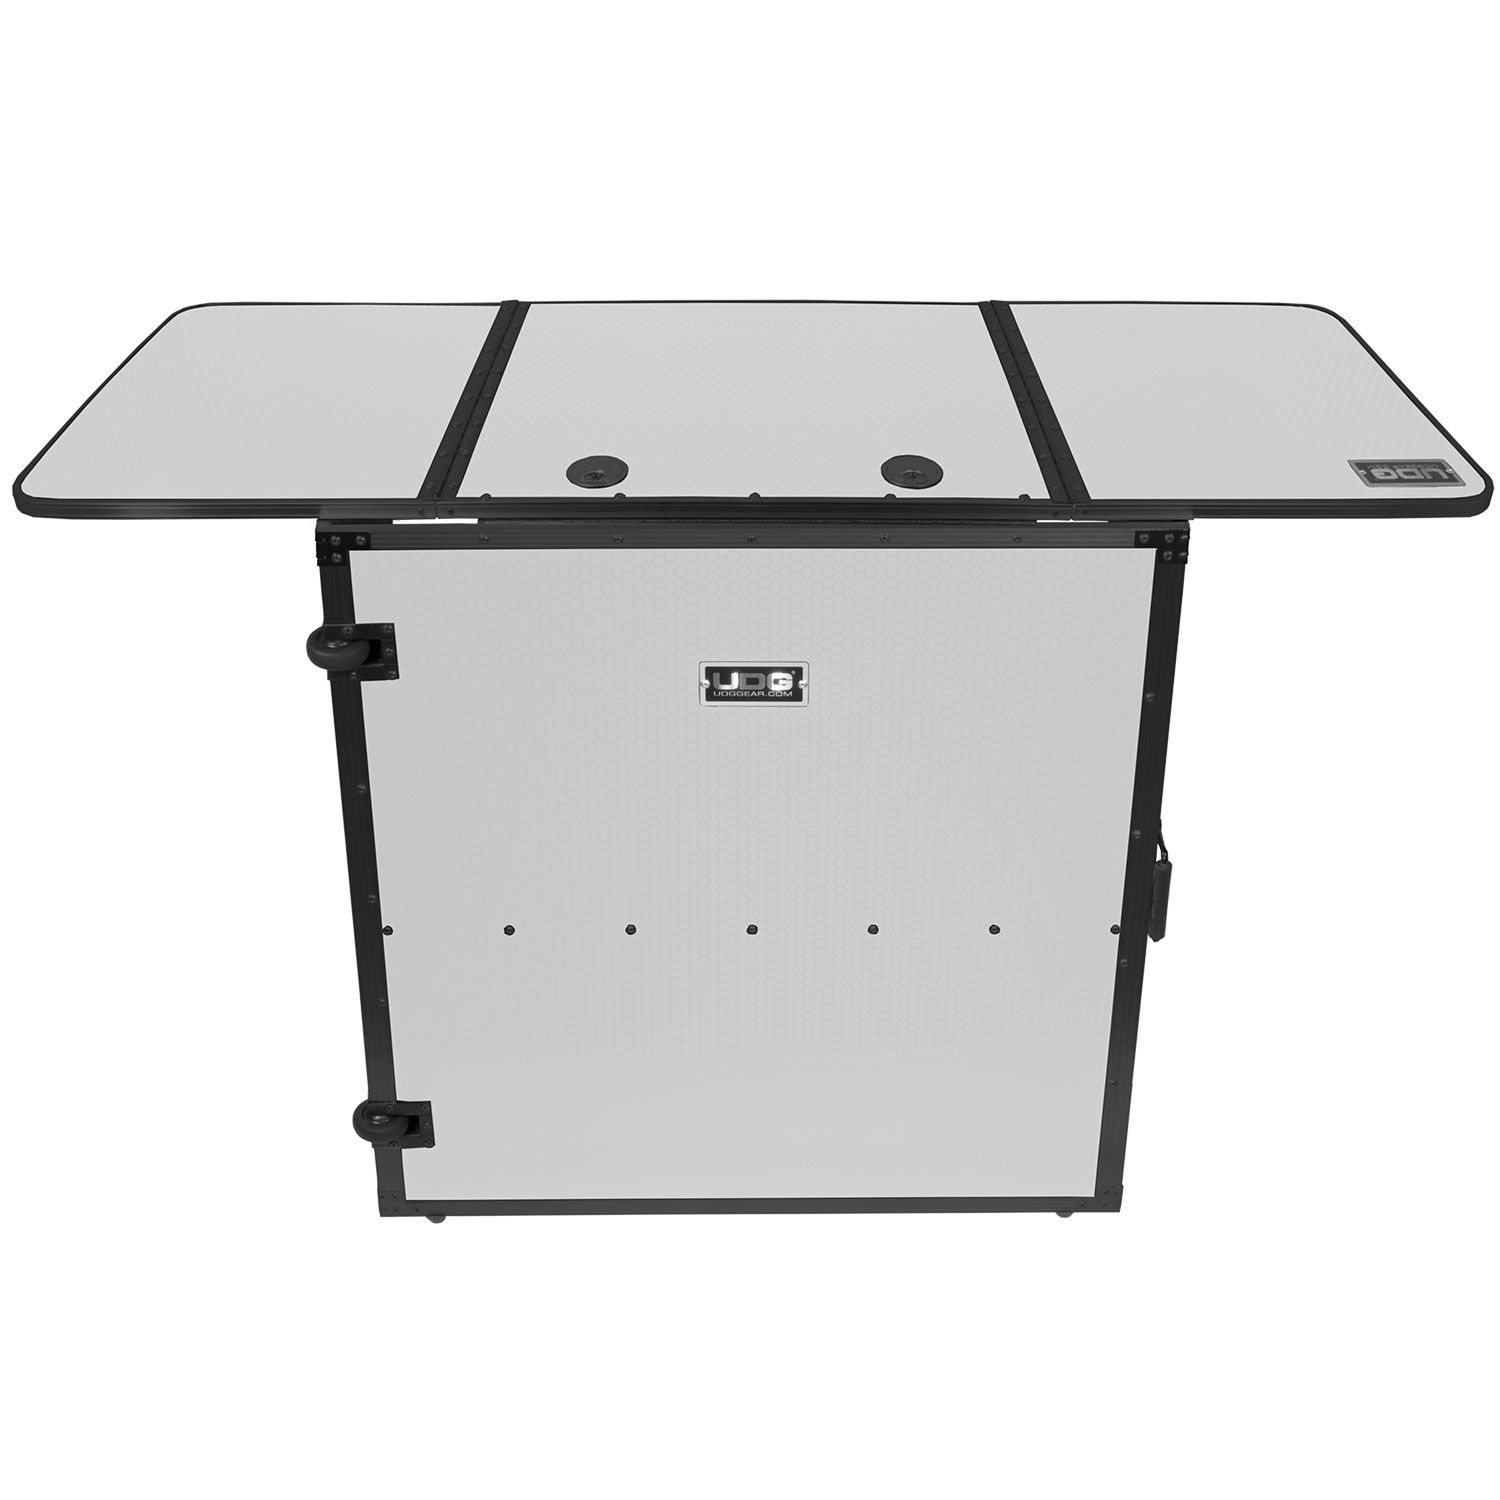 UDG Ulti. Fold Out DJ Table Wh